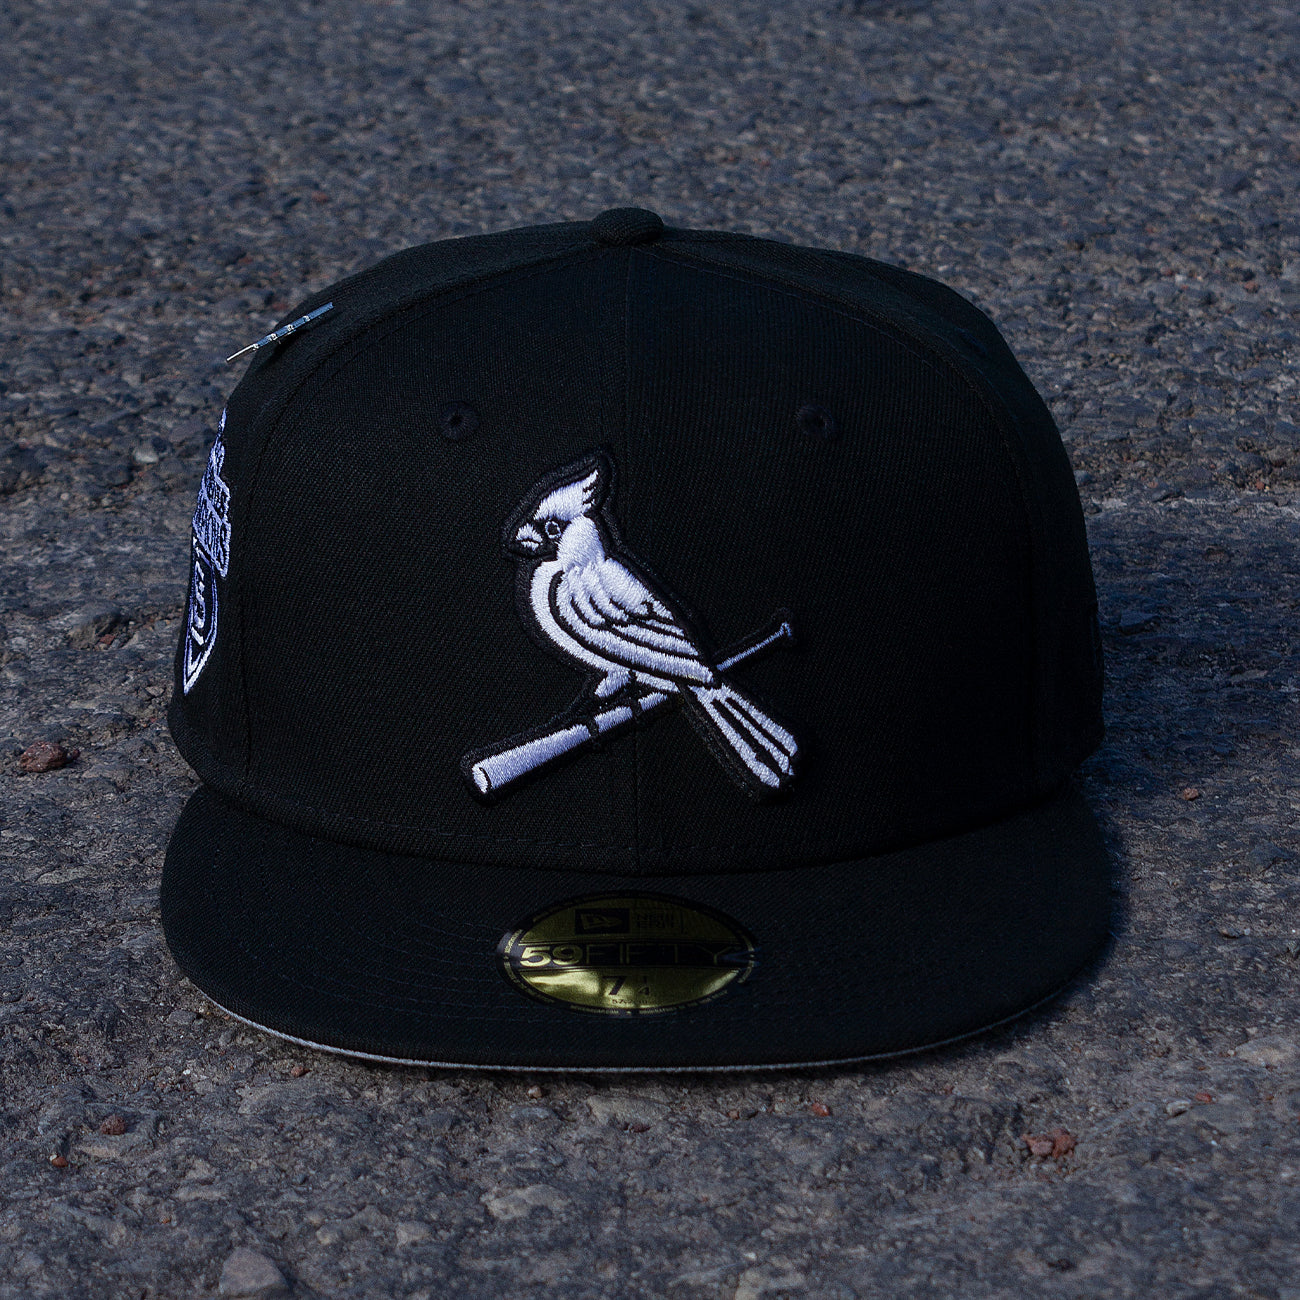  MLB St. Louis Cardinals Black & Gray 59Fifty Fitted Cap,  Black/Gray, 734 : Sports Fan Baseball Caps : Sports & Outdoors